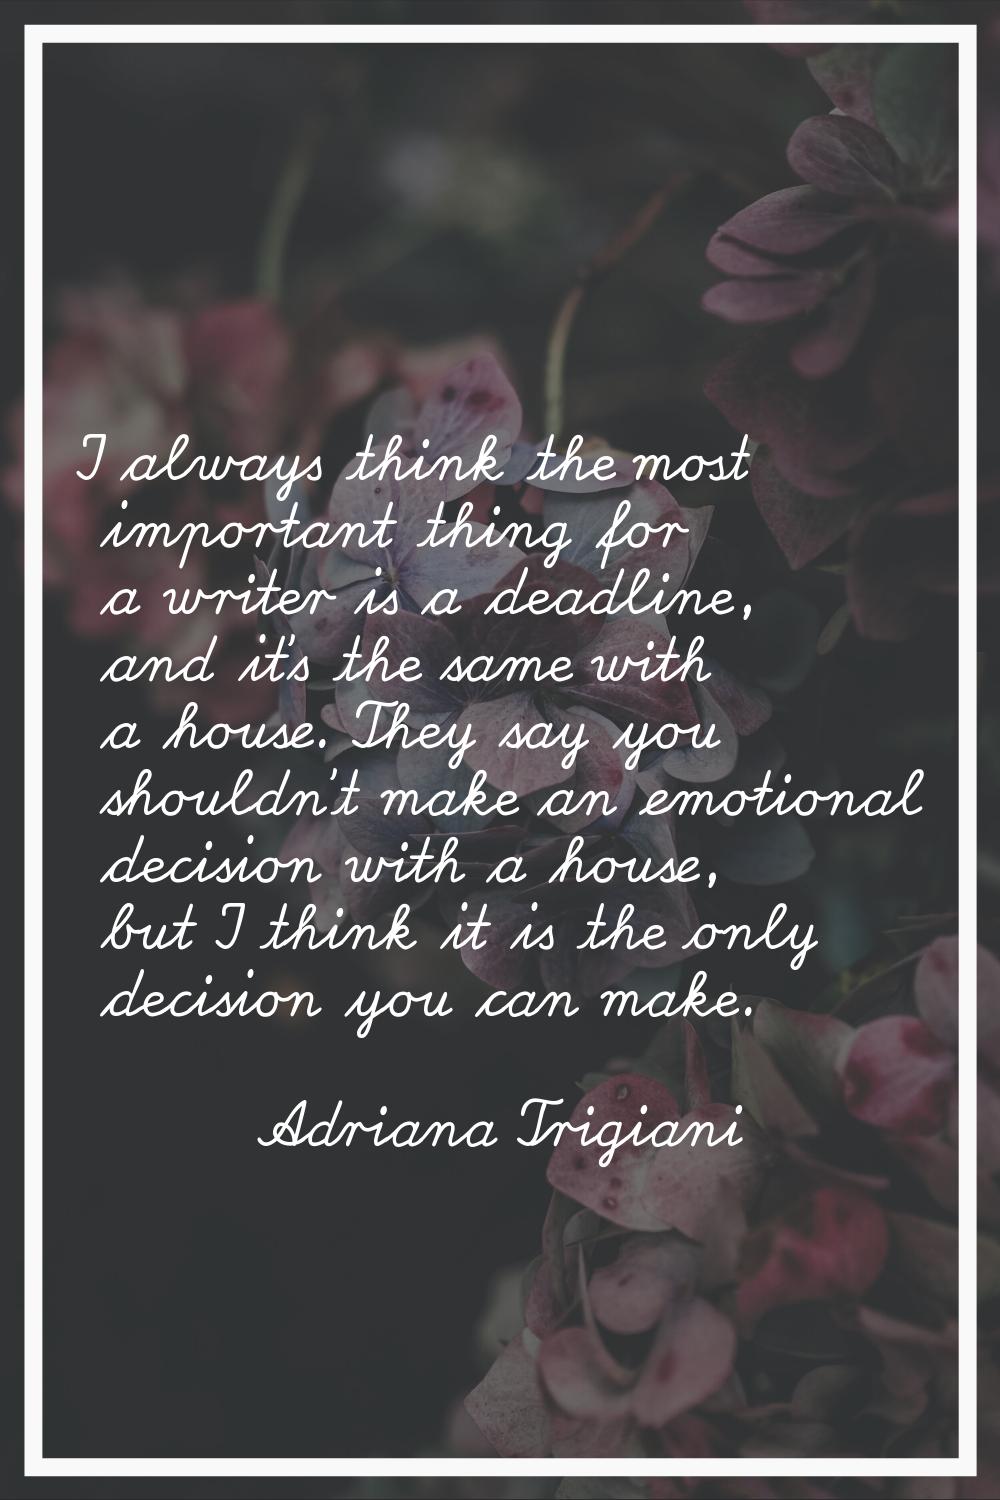 I always think the most important thing for a writer is a deadline, and it's the same with a house.